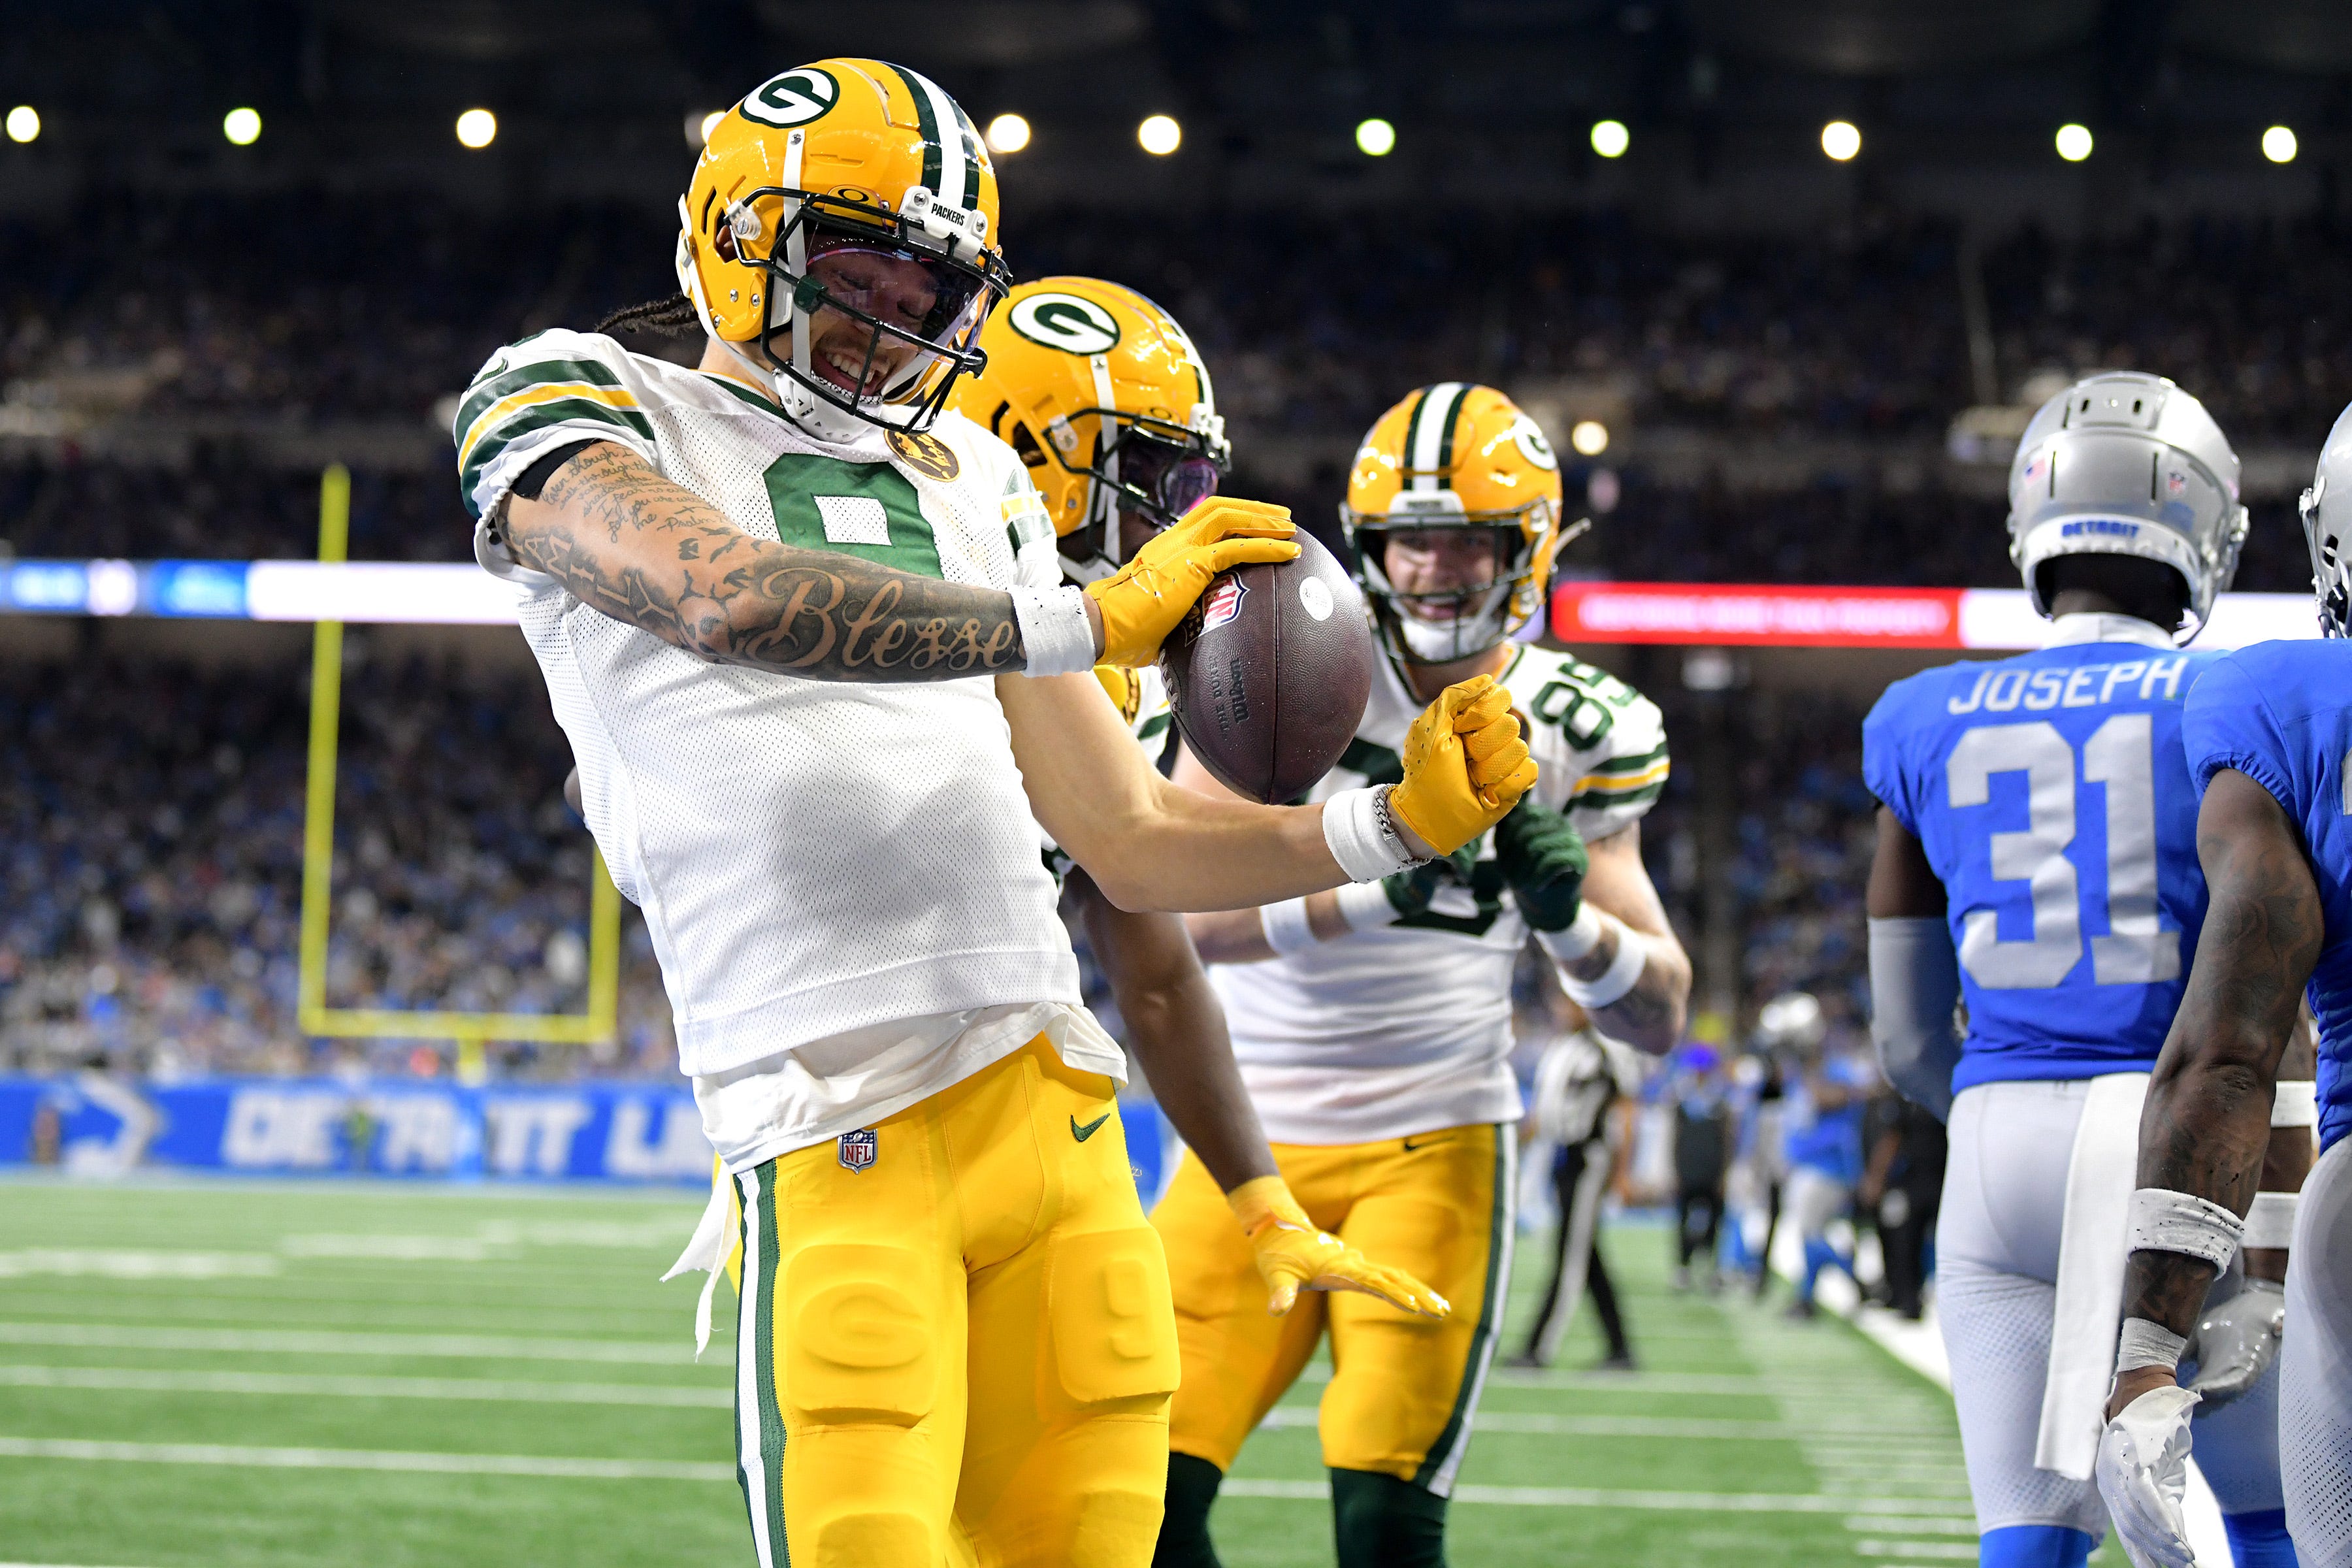 Fans on social media quickly turn on the Packers after loss to New York